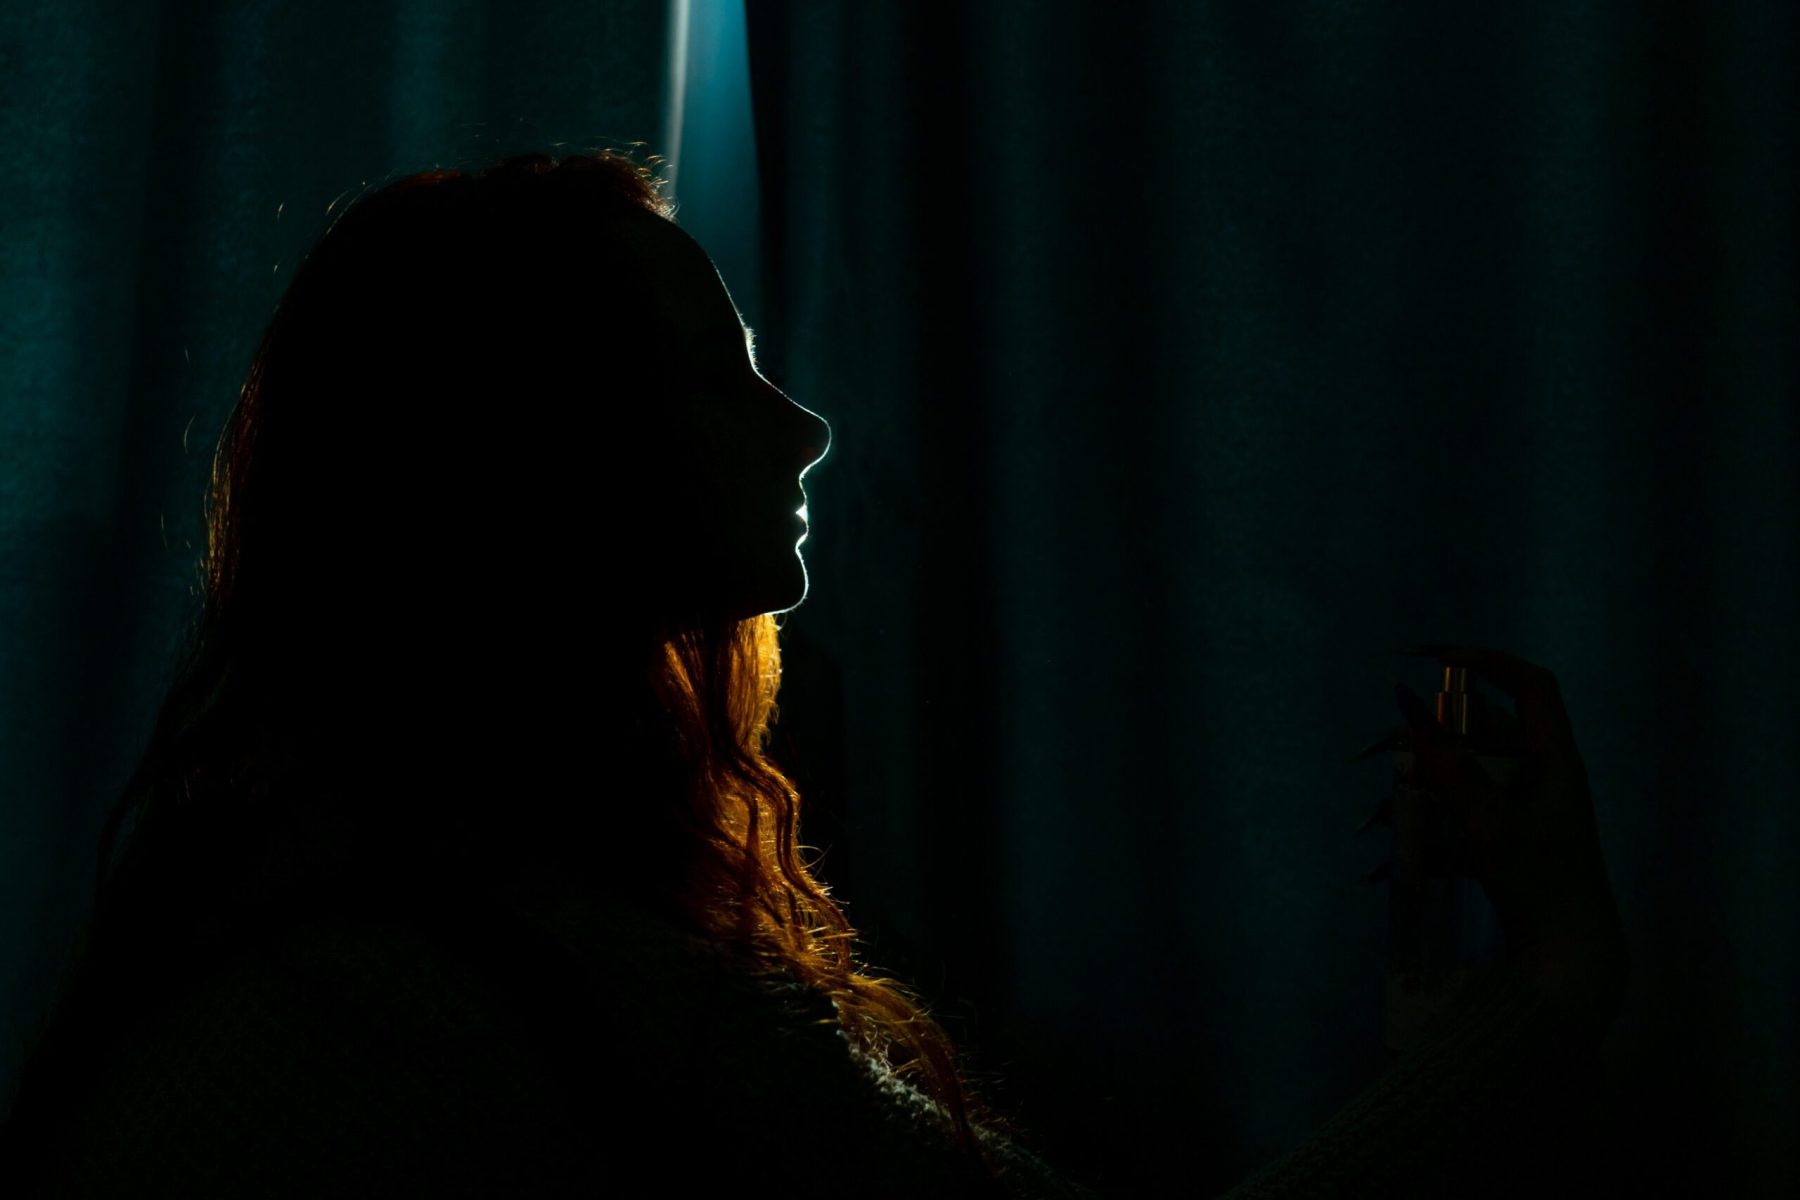 Silhouette of a young woman in the dark.